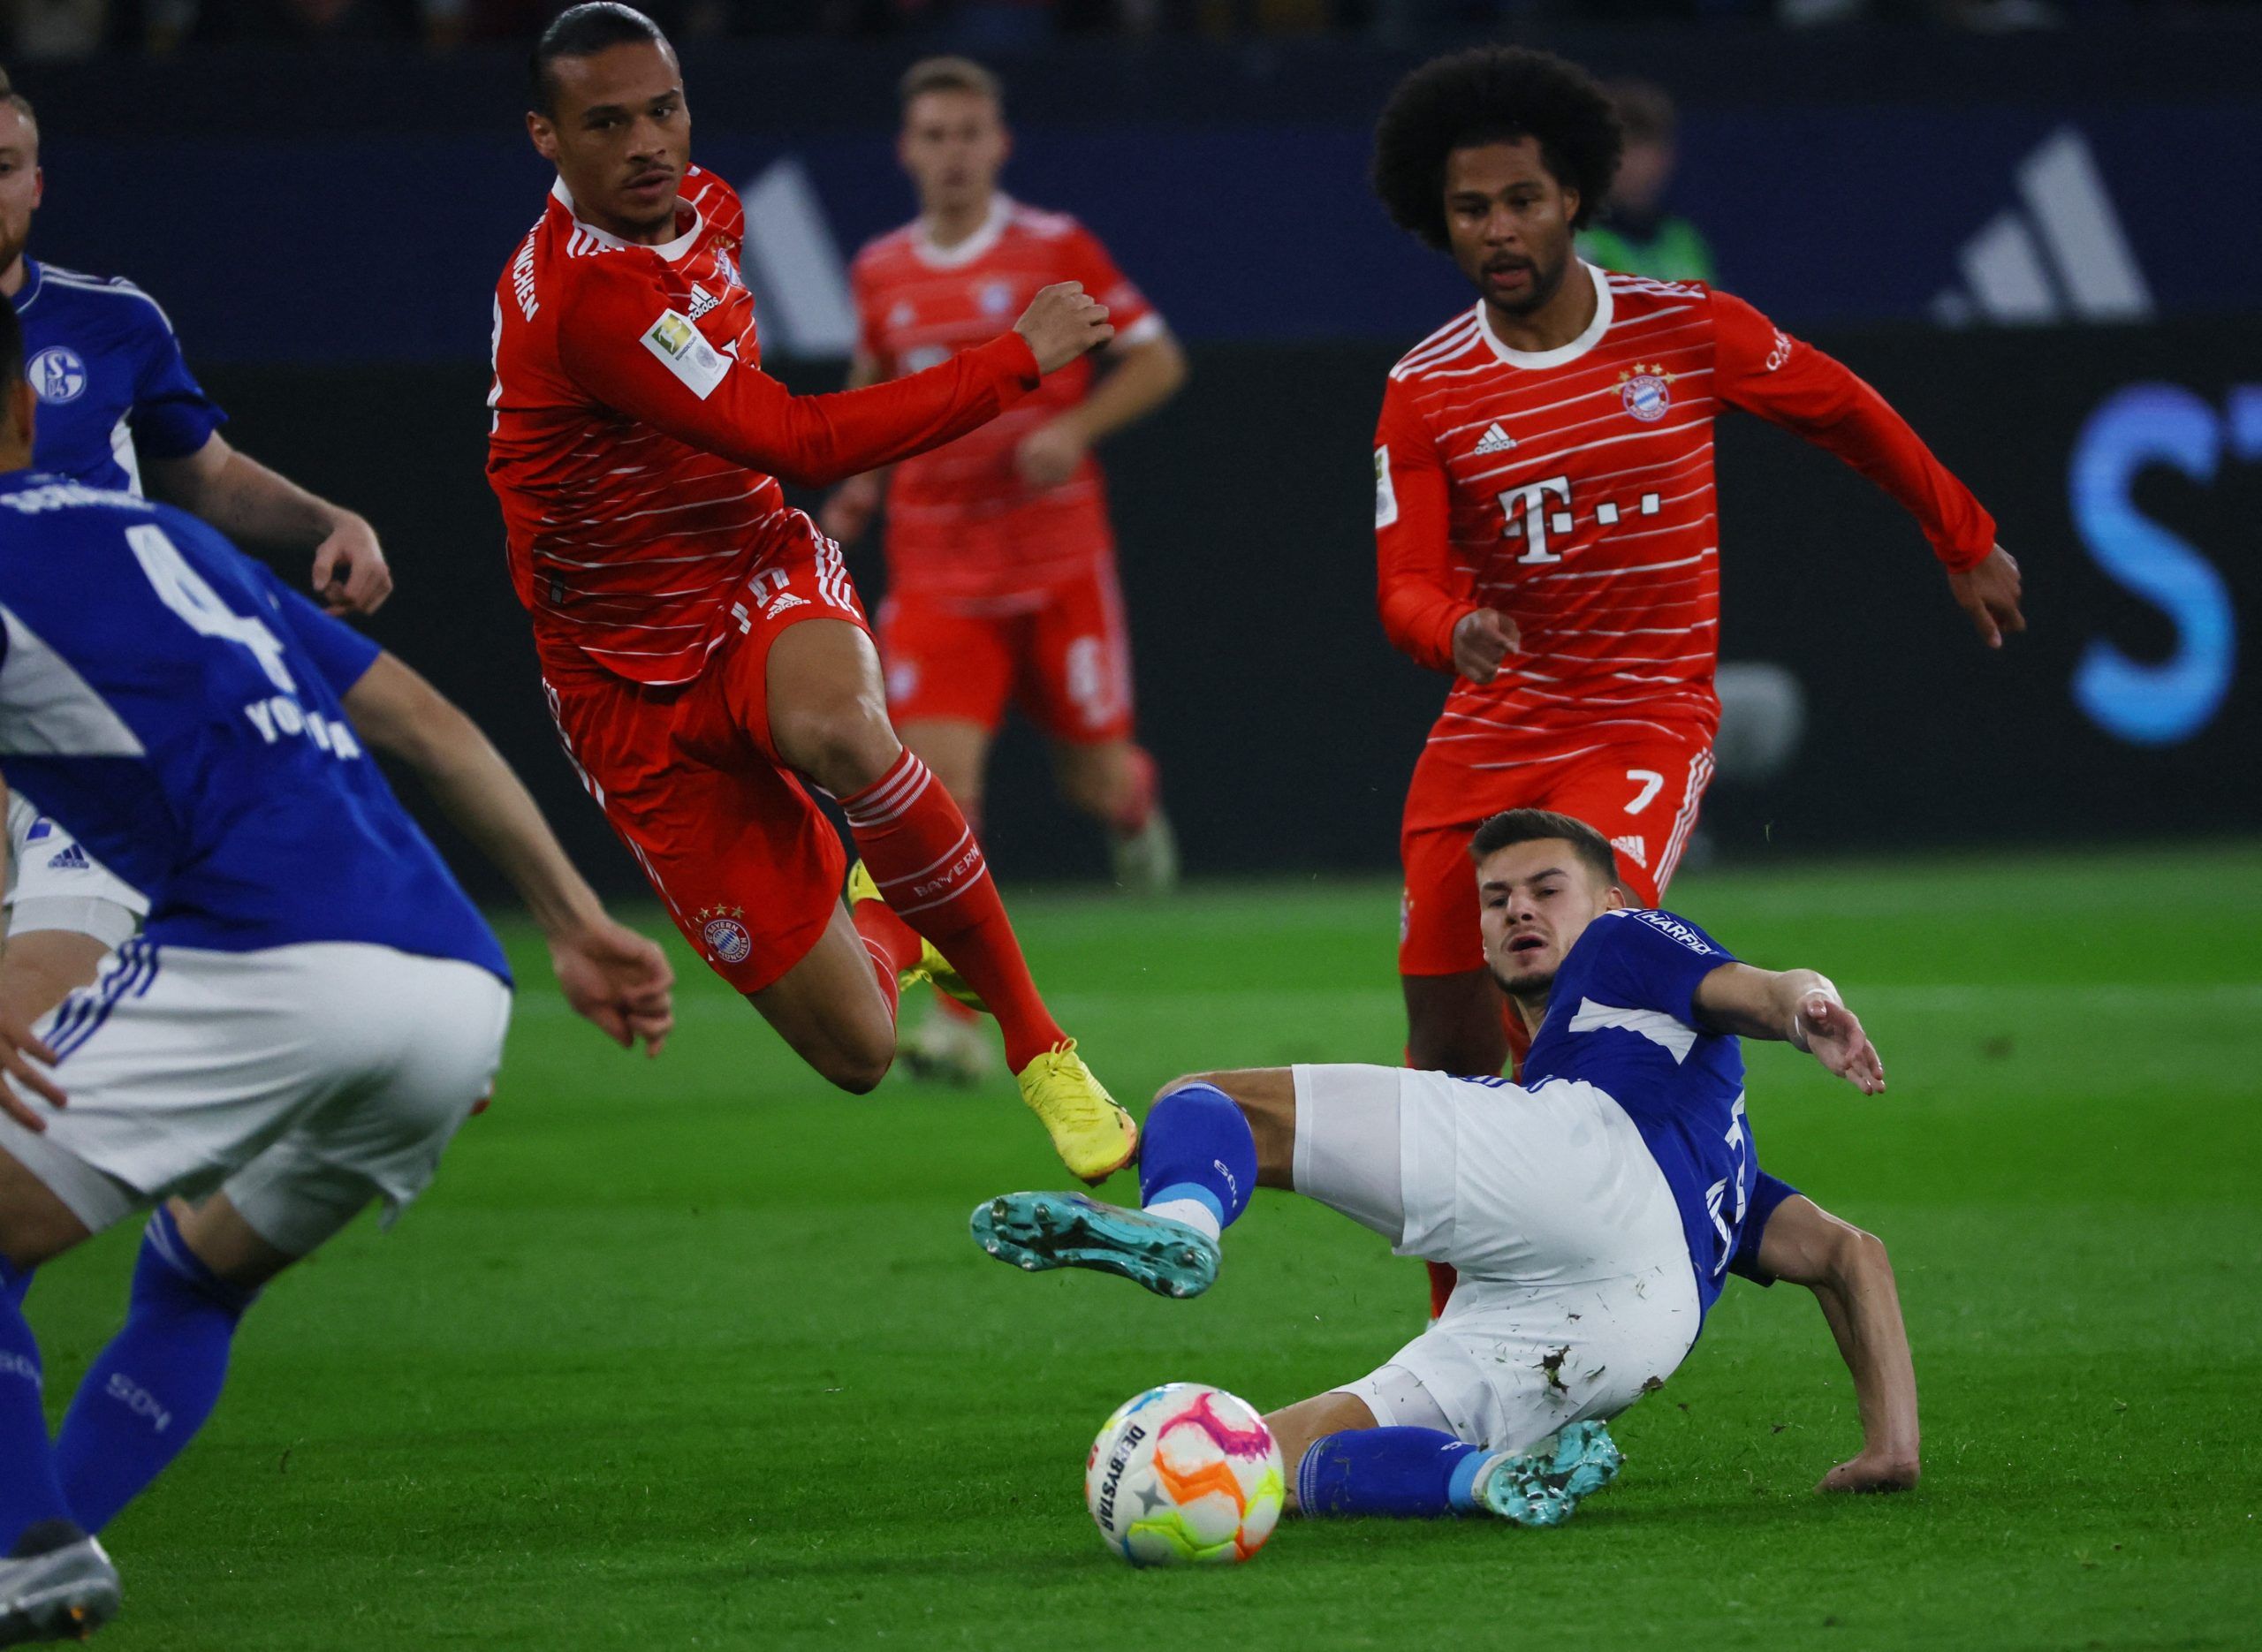 Leroy-Sane-Bayern-Munich-Arsenal REUTERS/Wolfgang Rattay DFL REGULATIONS PROHIBIT ANY USE OF PHOTOGRAPHS AS IMAGE SEQUENCES AND/OR QUASI-VIDEO.